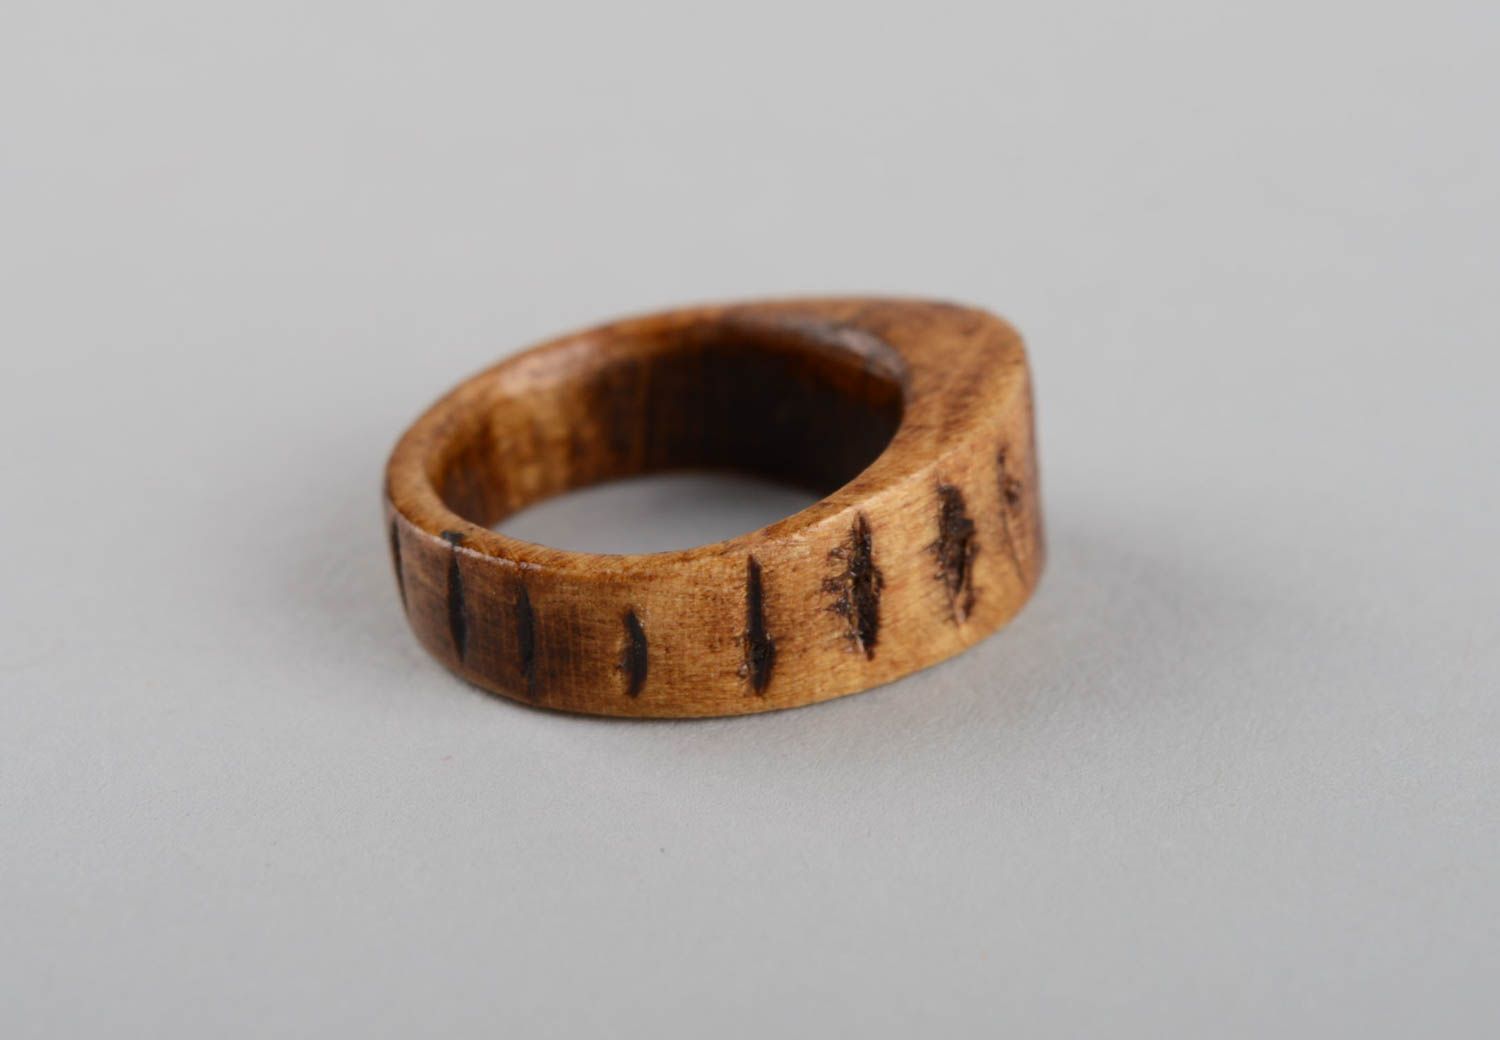 Unusual handmade wooden ring fashion accessories wood craft gifts for her photo 9